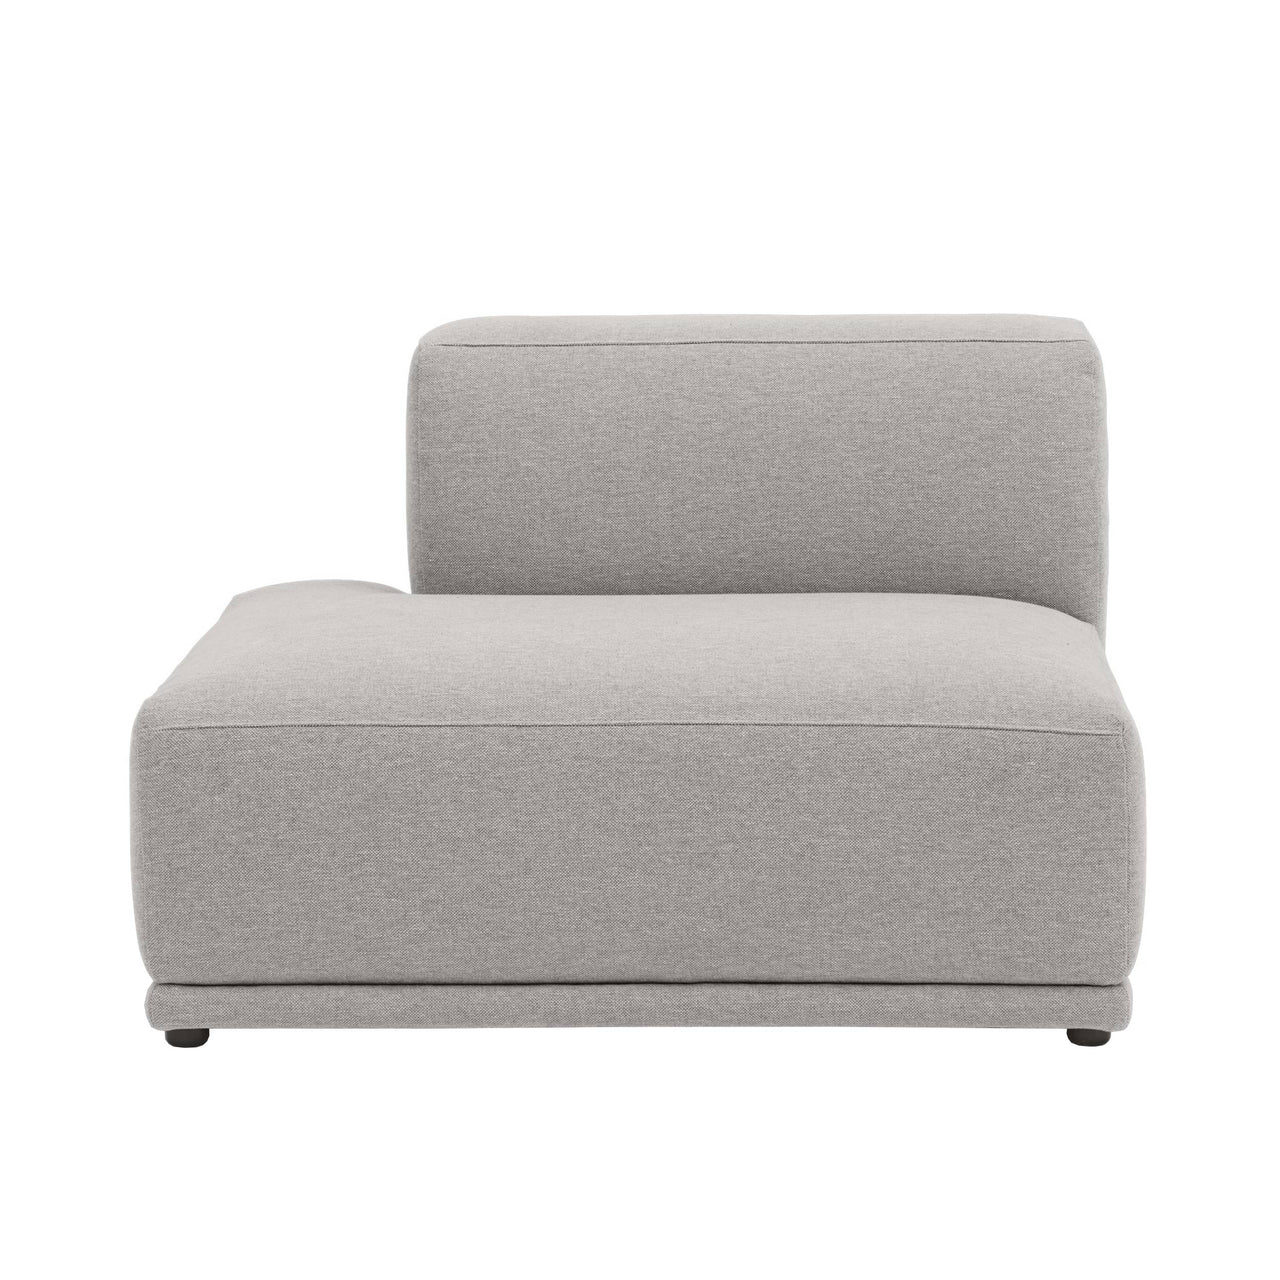 Connect Soft Sofa Modules: Left Open-Ended C